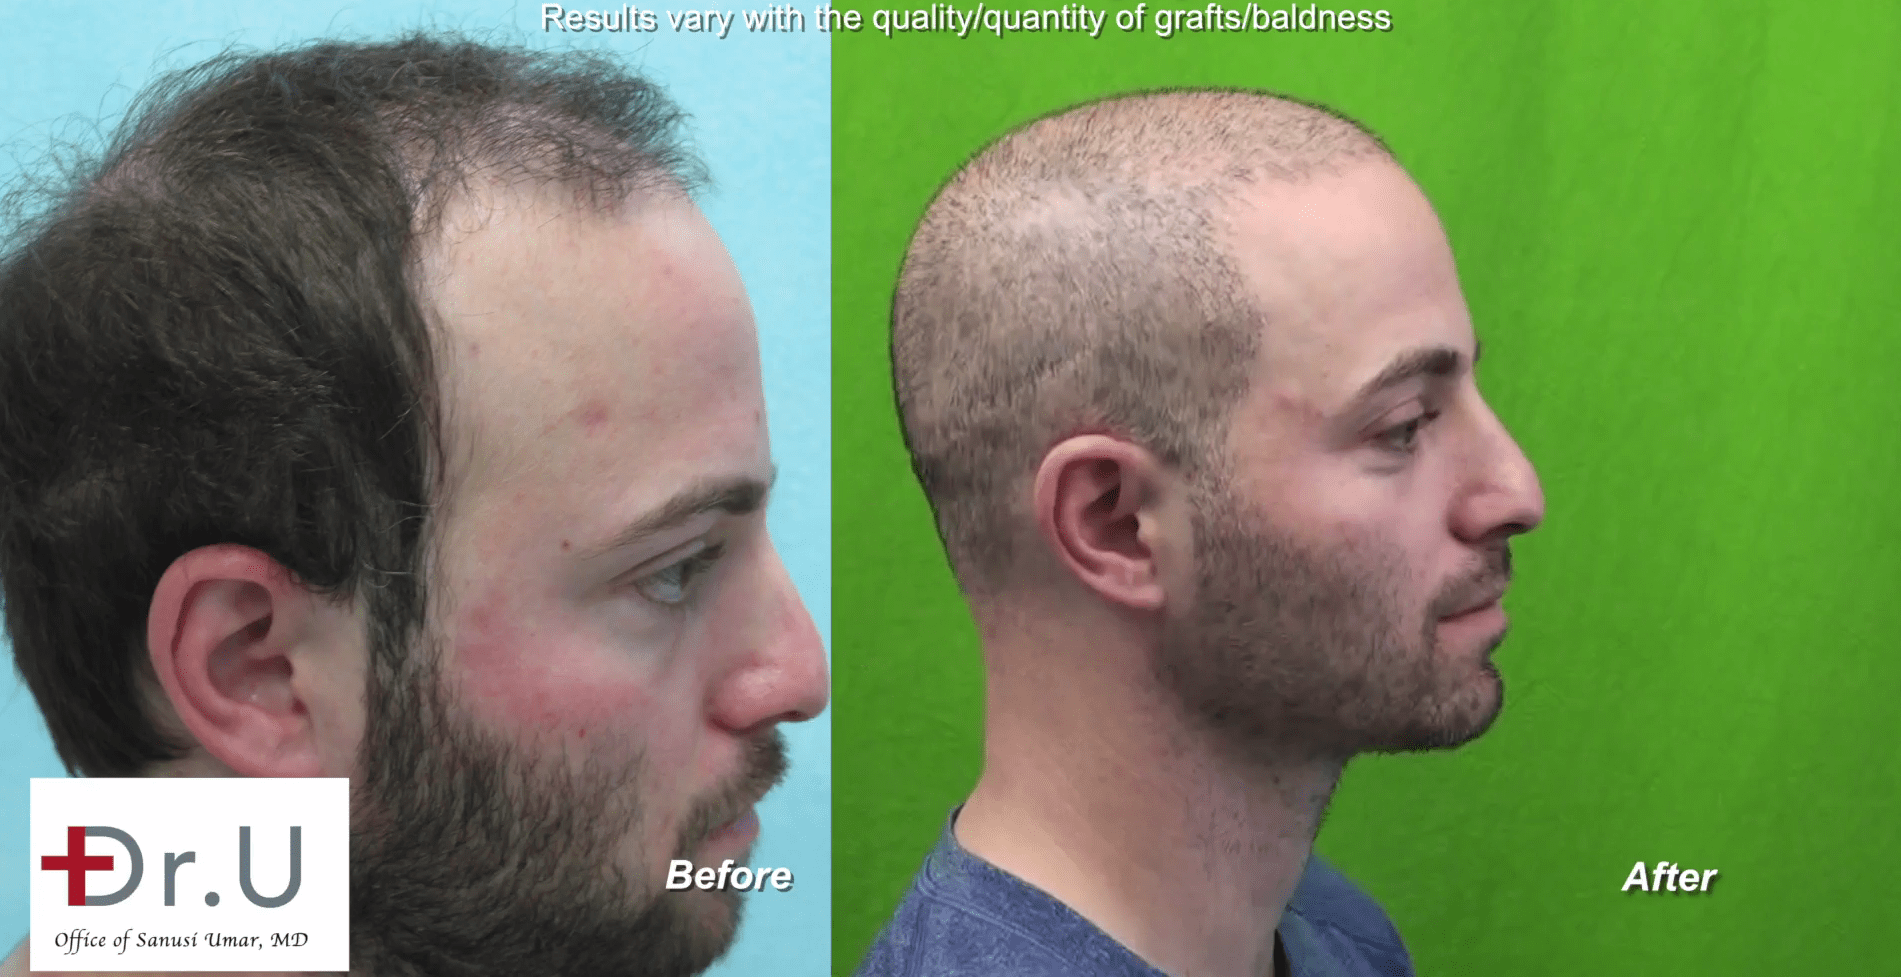 VIDEO: Los Angeles Young Age Hair Transplant Using Dr. UGraft By Dr. U